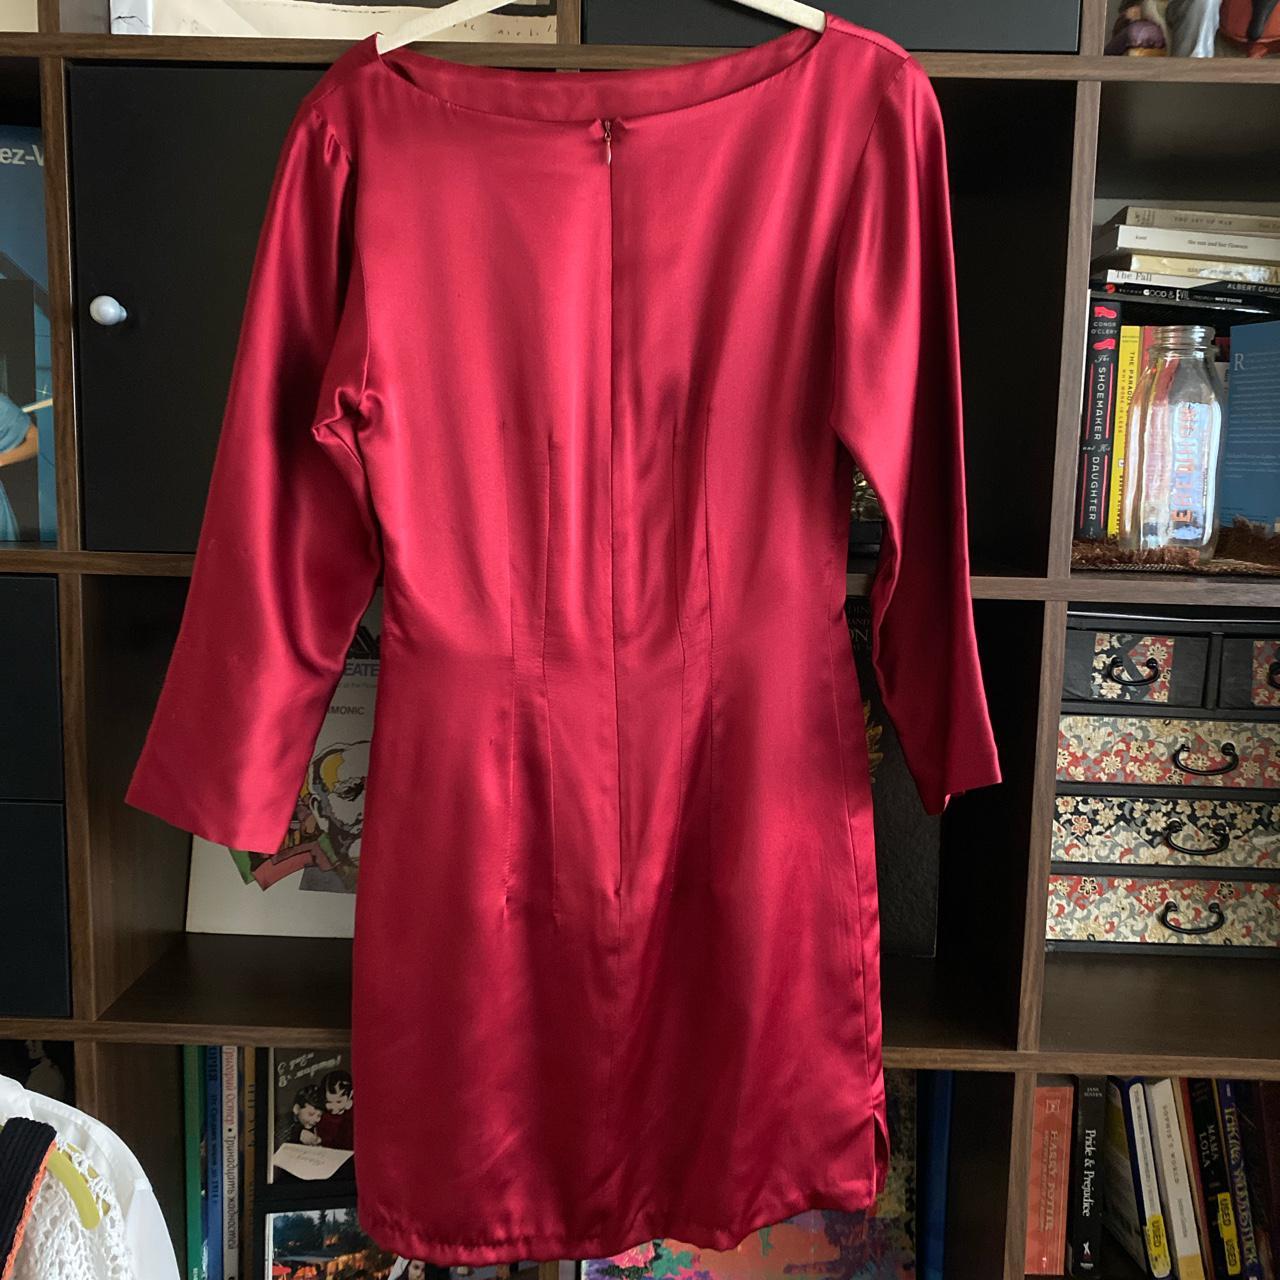 Product Image 2 - Vintage Silk Red Dress. Bought